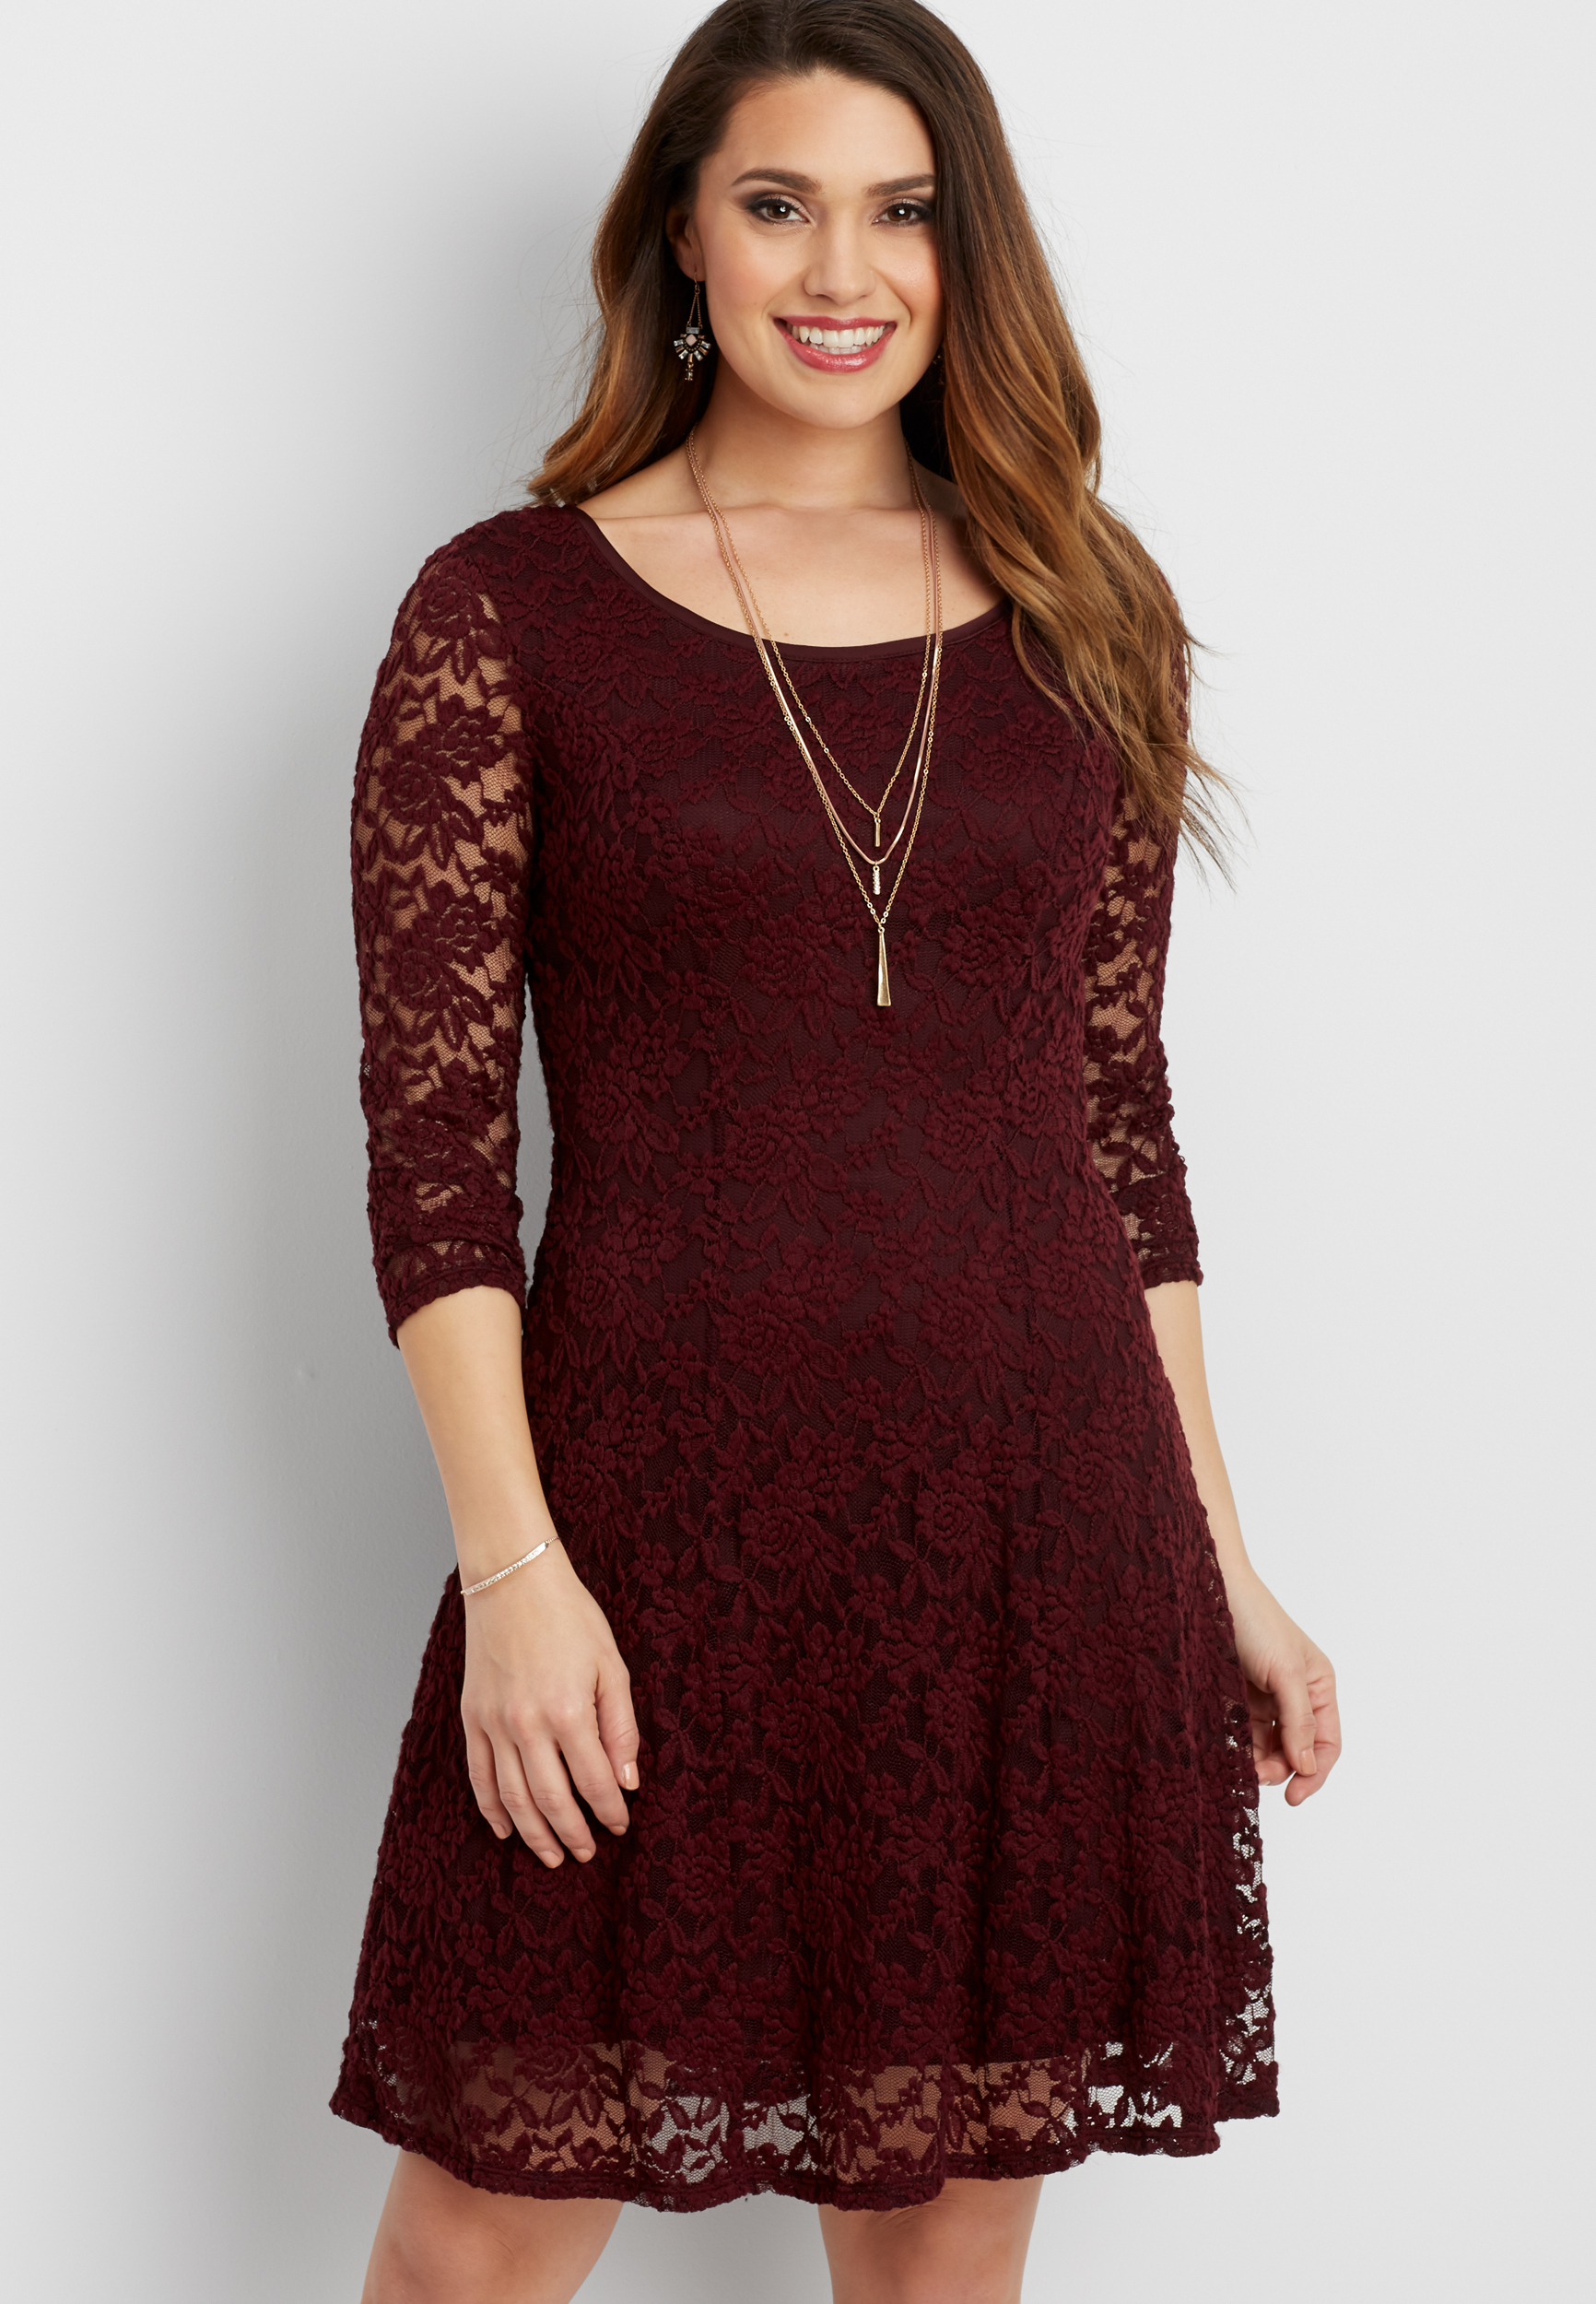 lace dress with strappy back | maurices